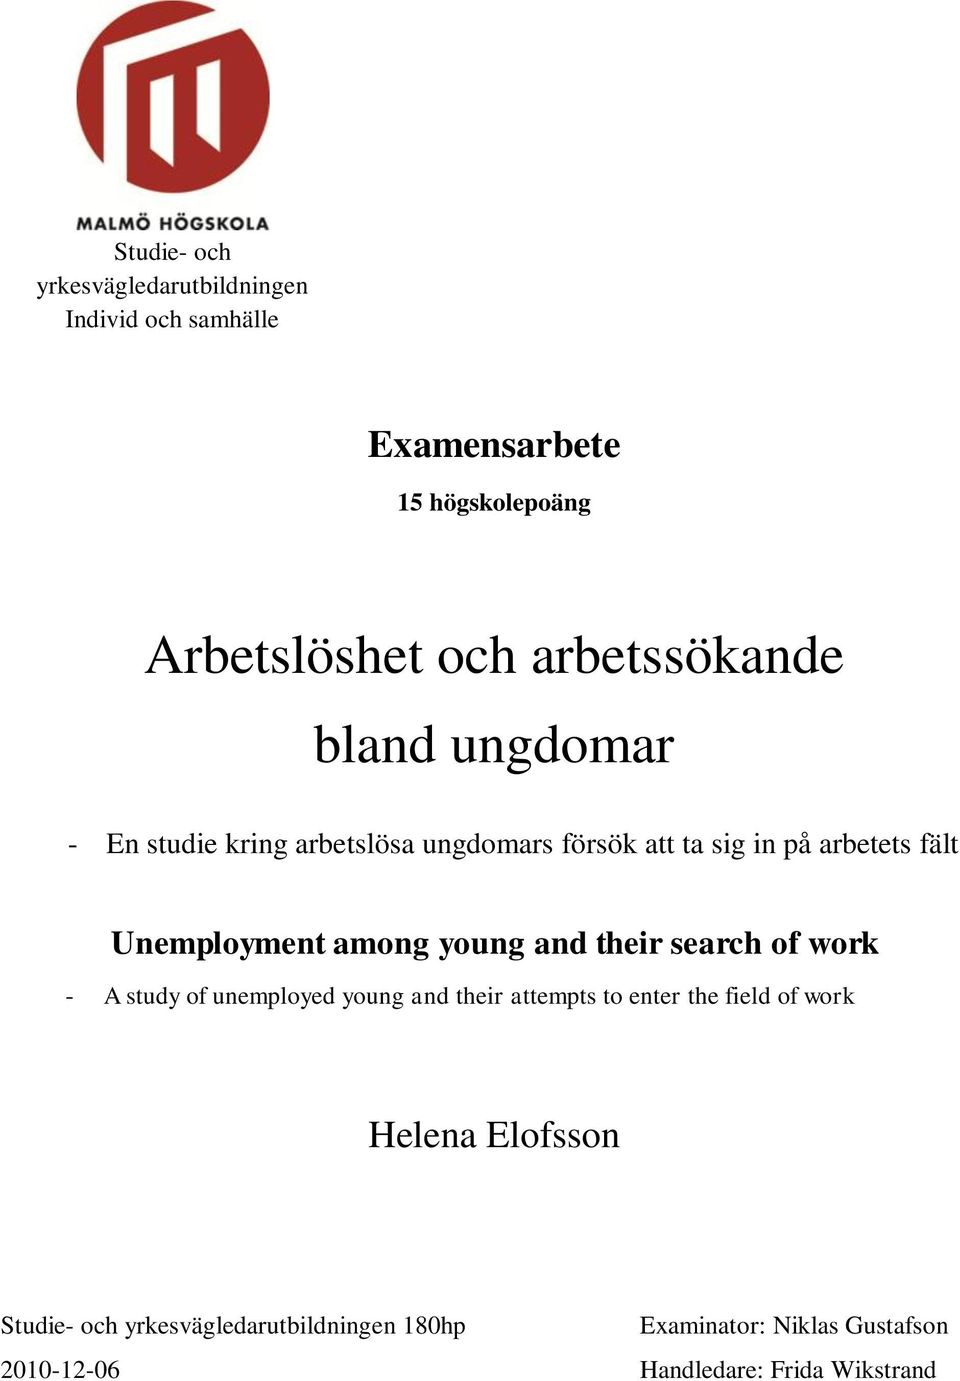 Unemployment among young and their search of work - A study of unemployed young and their attempts to enter the